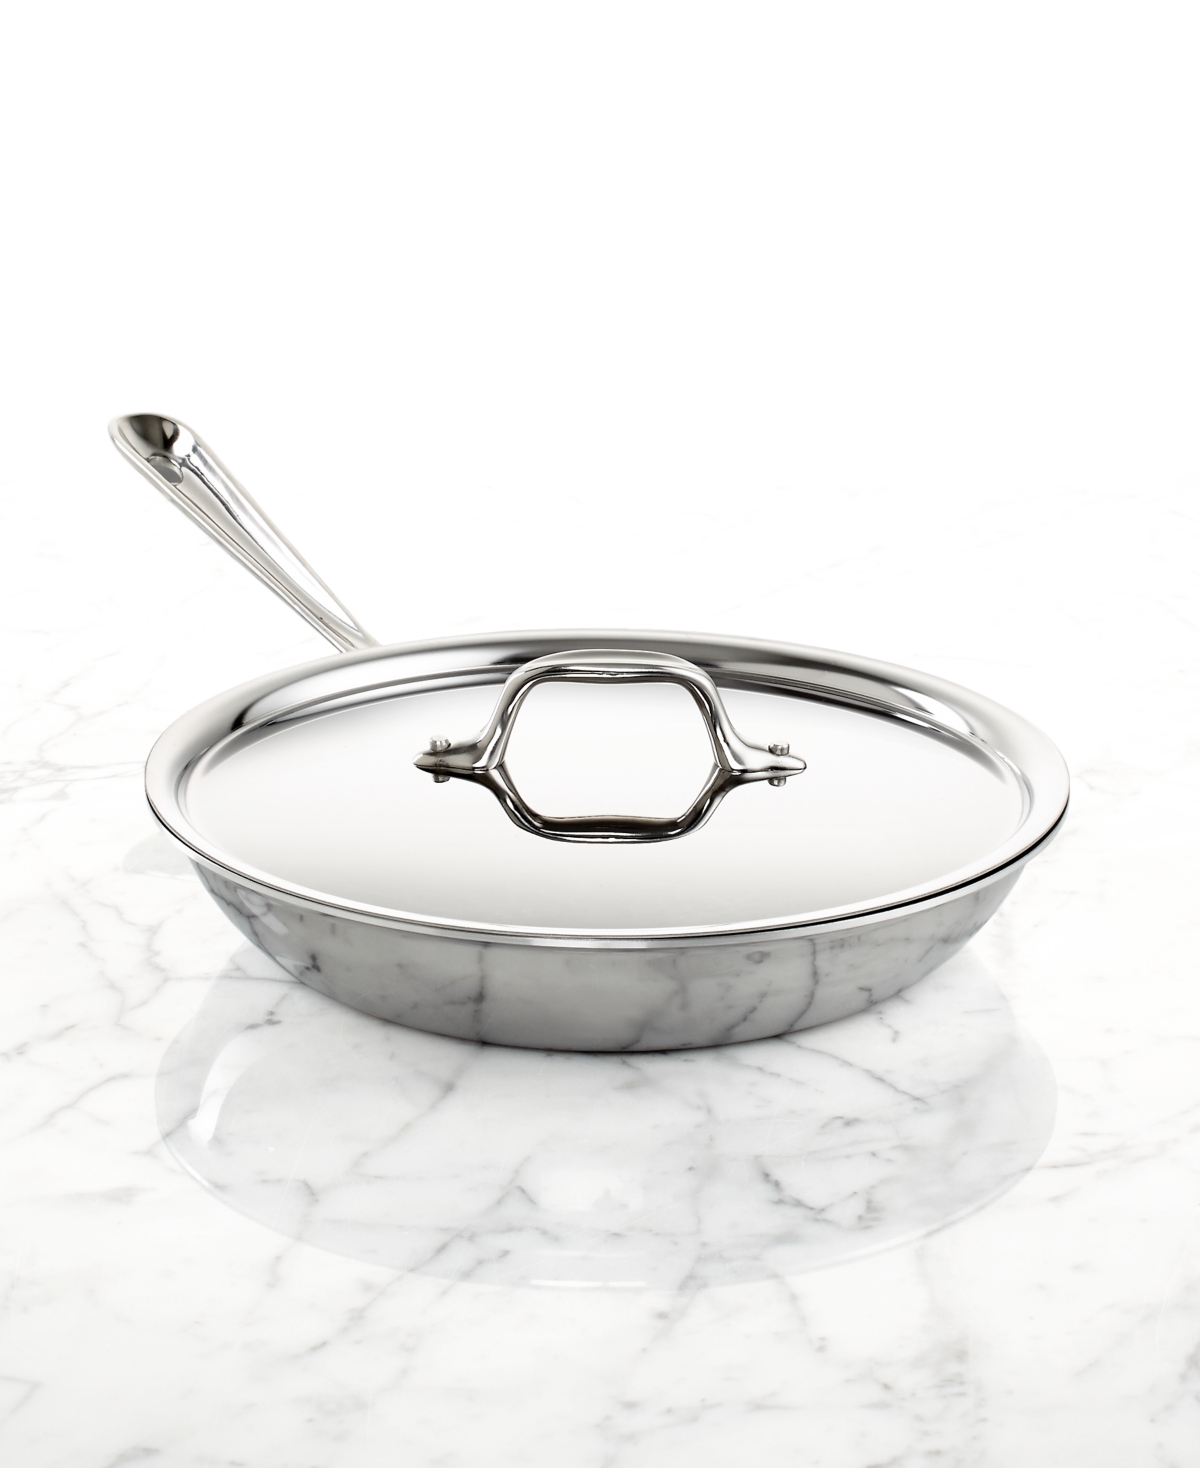 All Clad Tri-Ply Stainless Steel 10 Covered Fry Pan